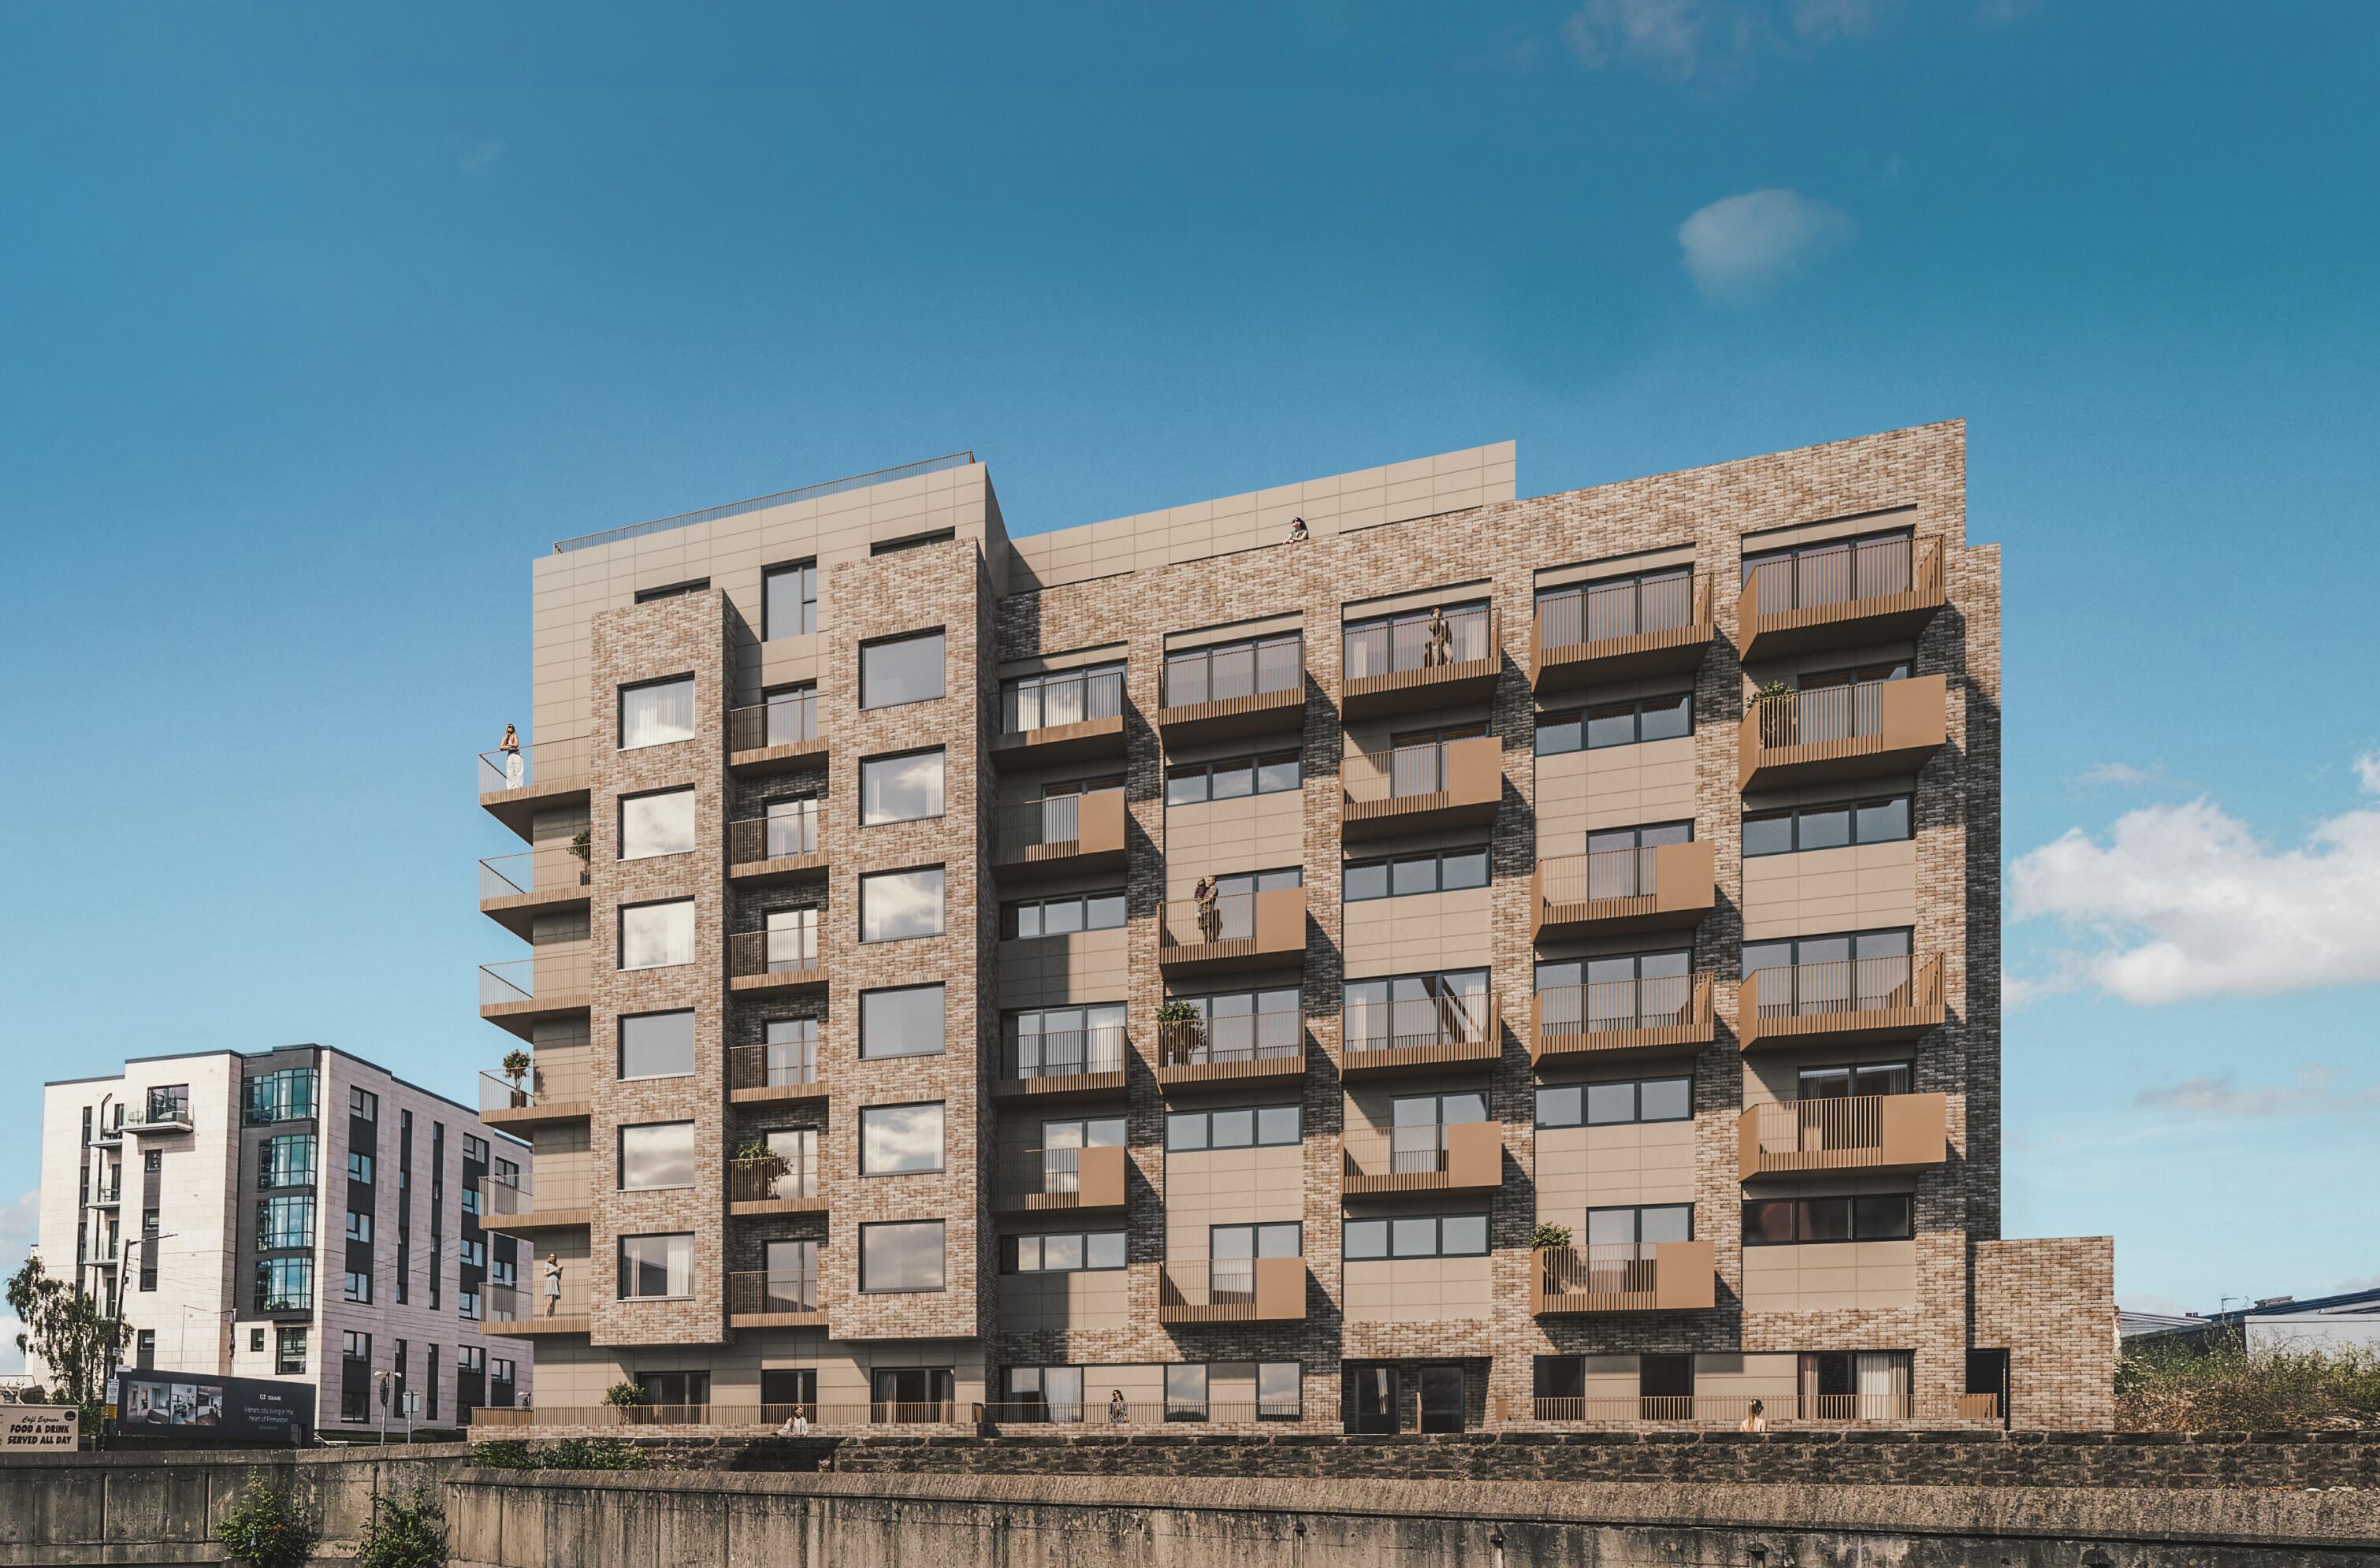 Finnieston apartments approved by government after ‘no planning determination’ from council